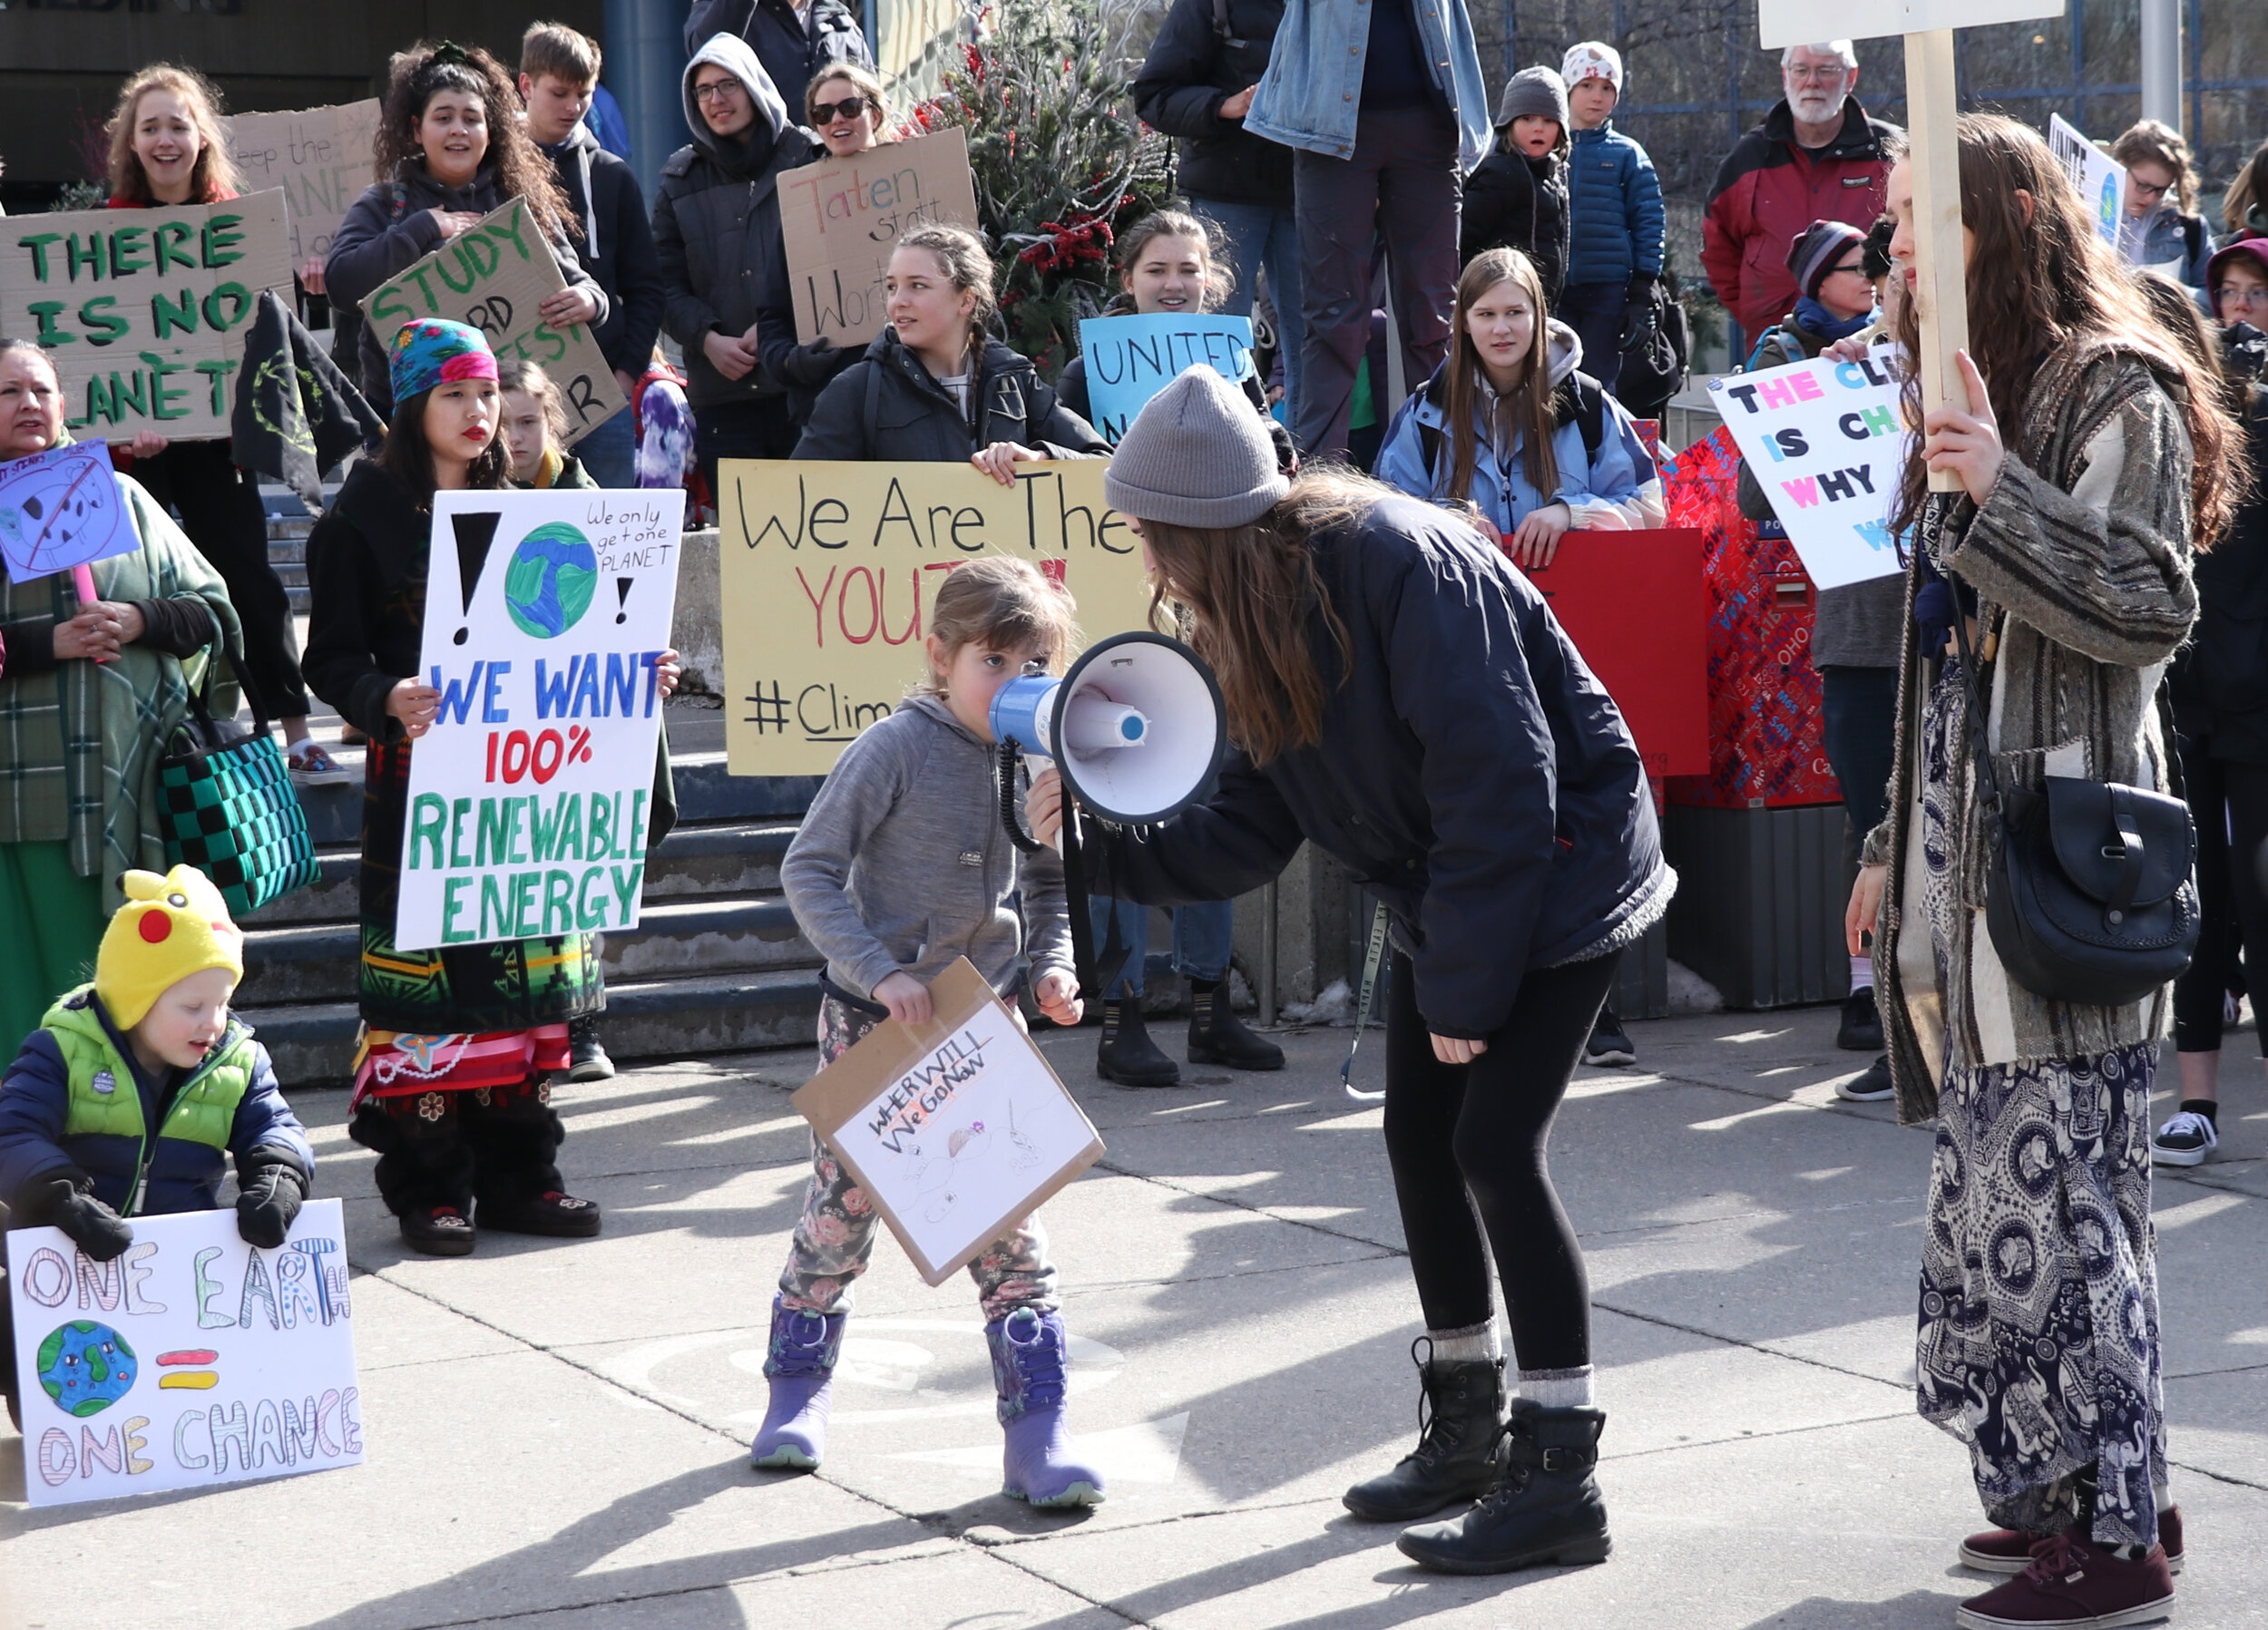  Protesters gather in front of City Hall in Calgary on Friday, March 15, 2019 for the Youth Strike for Climate. The majority of the protesters were junior high and high school students with a few younger students mixed in. Post secondary students and